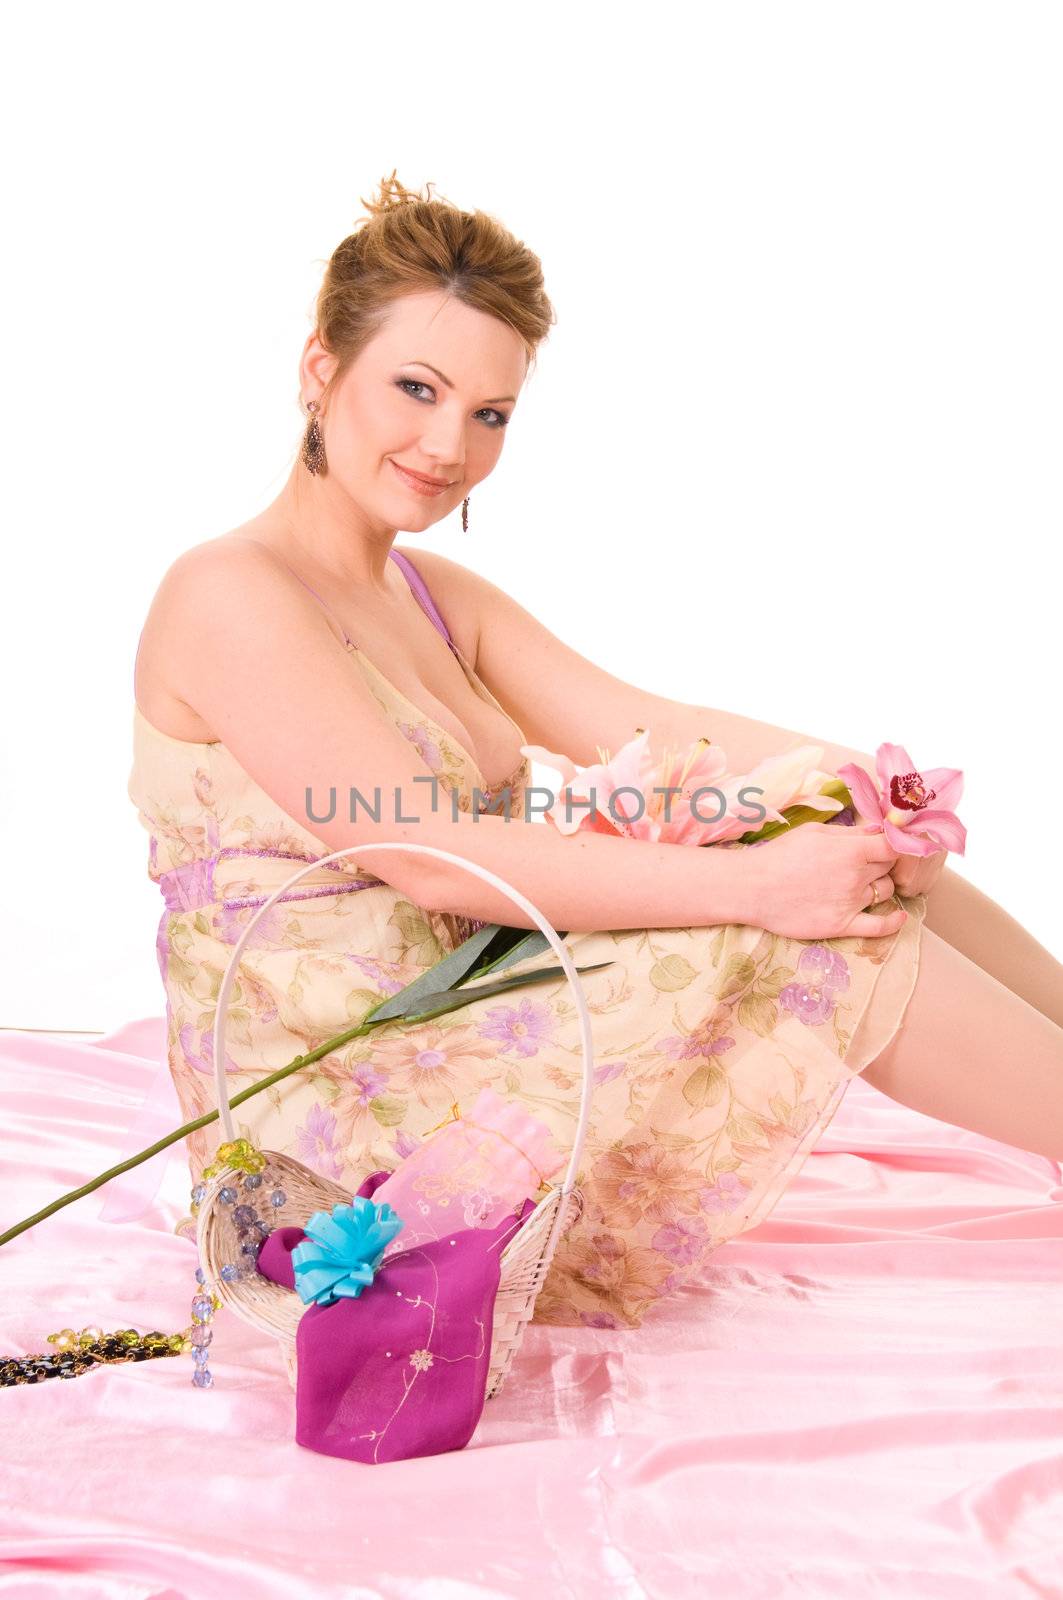 Beautiful woman with nice make-up, flowers and accessories on pink backgroumd